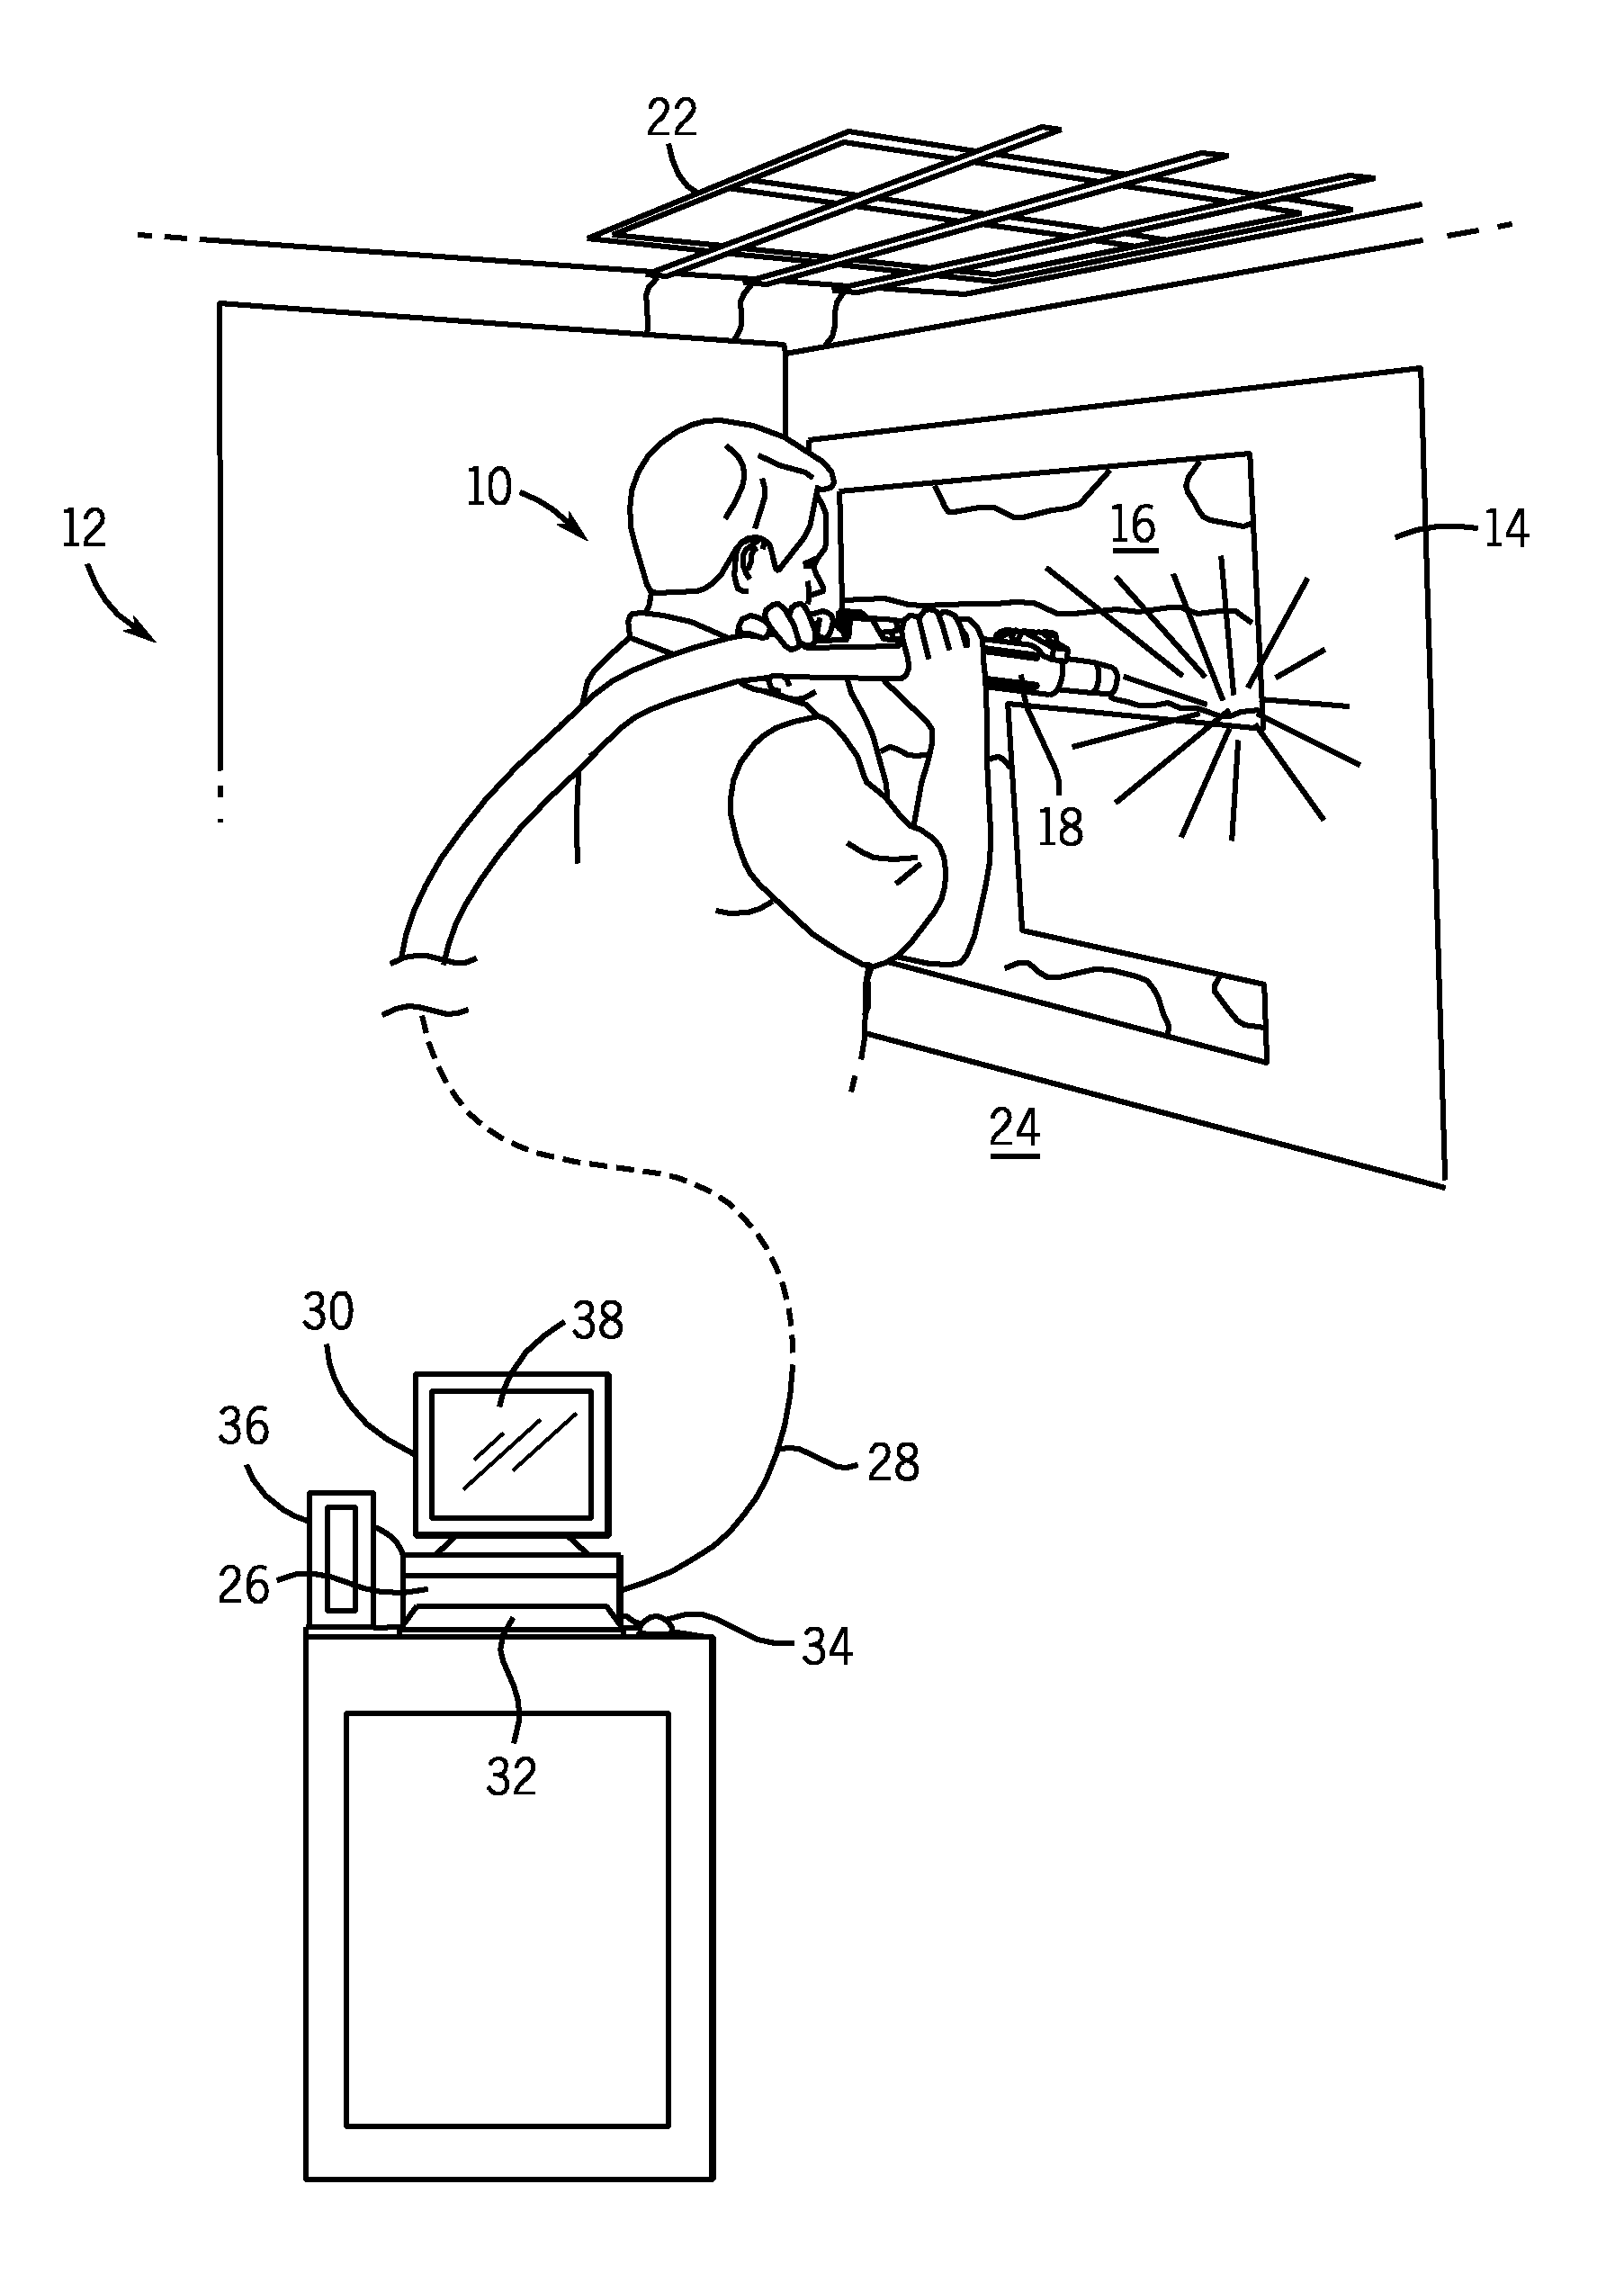 Virtual blasting system for removal of coating and/or rust from a virtual surface